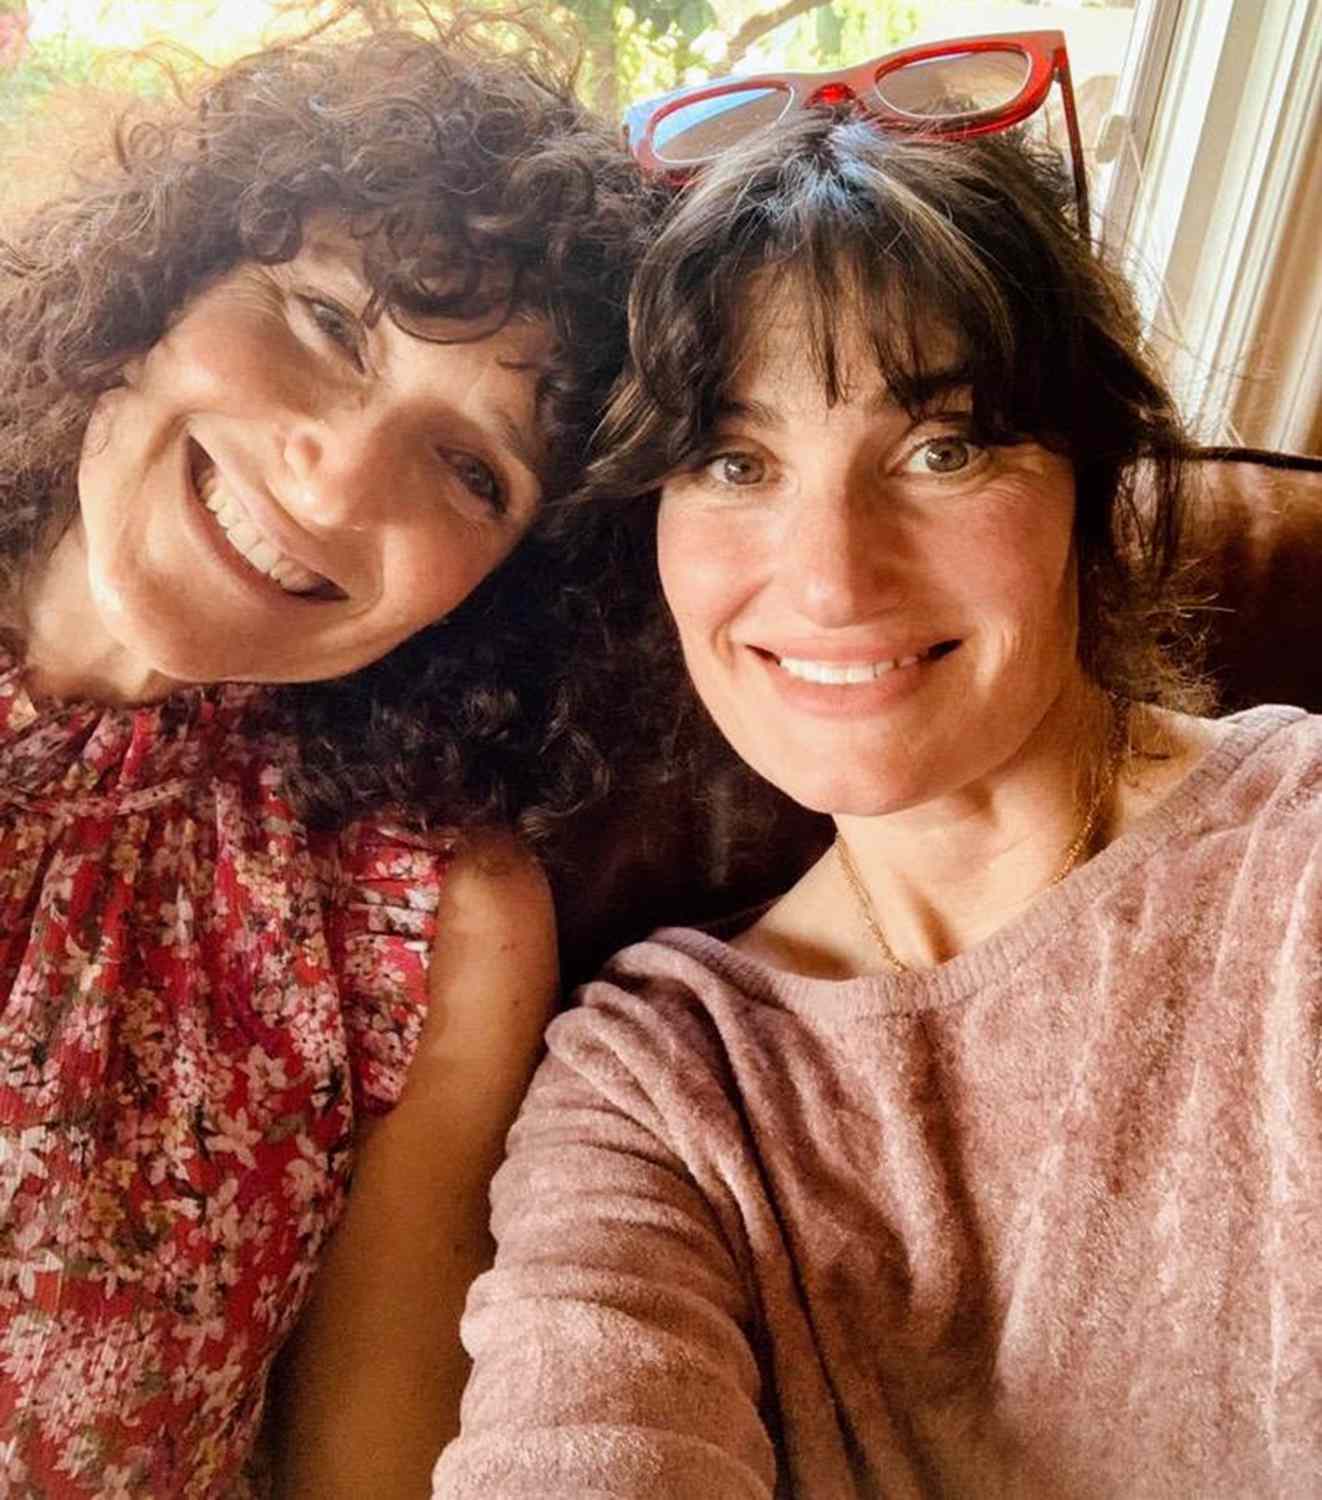 Idina Menzel and sister Cara Mentzel write their first picture book together